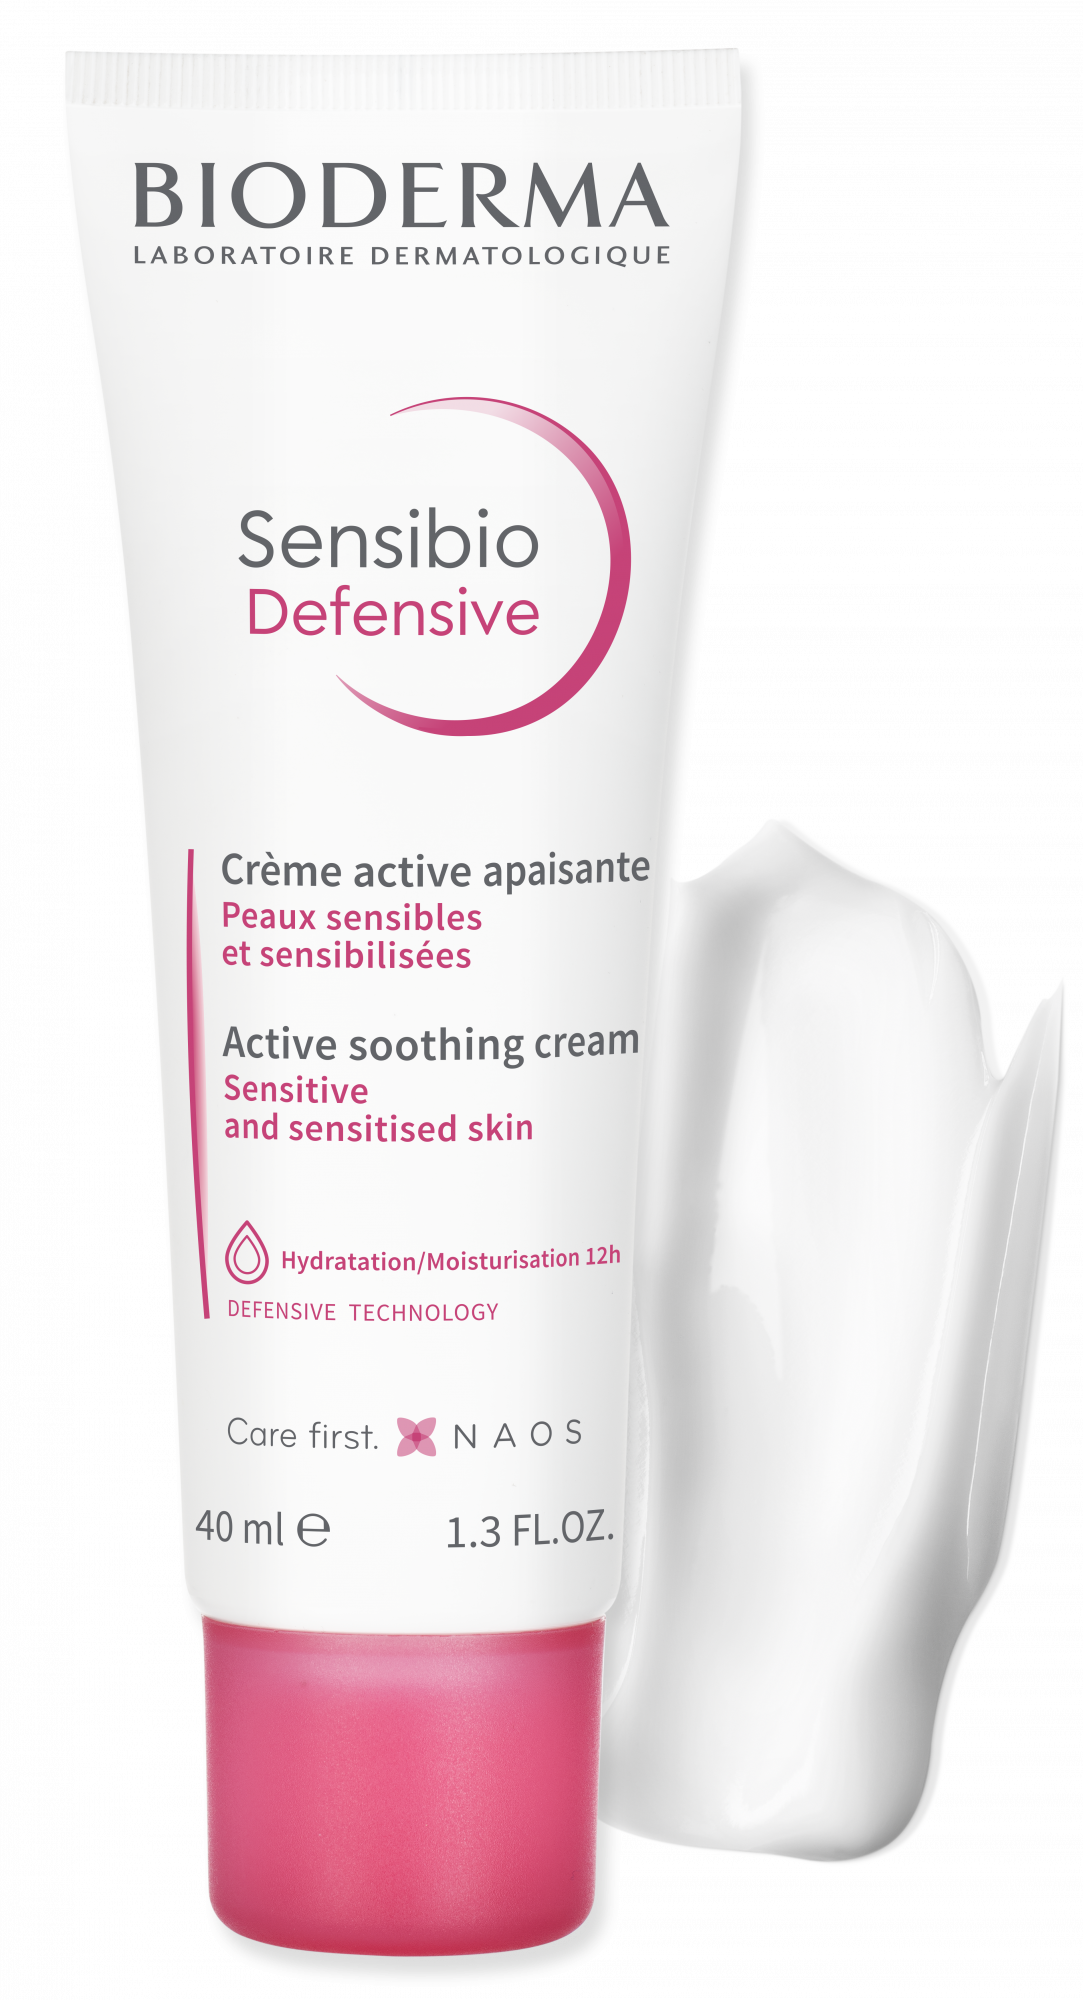 Sensibio Defensive  Active soothing cream for sensitive and sensitised skin